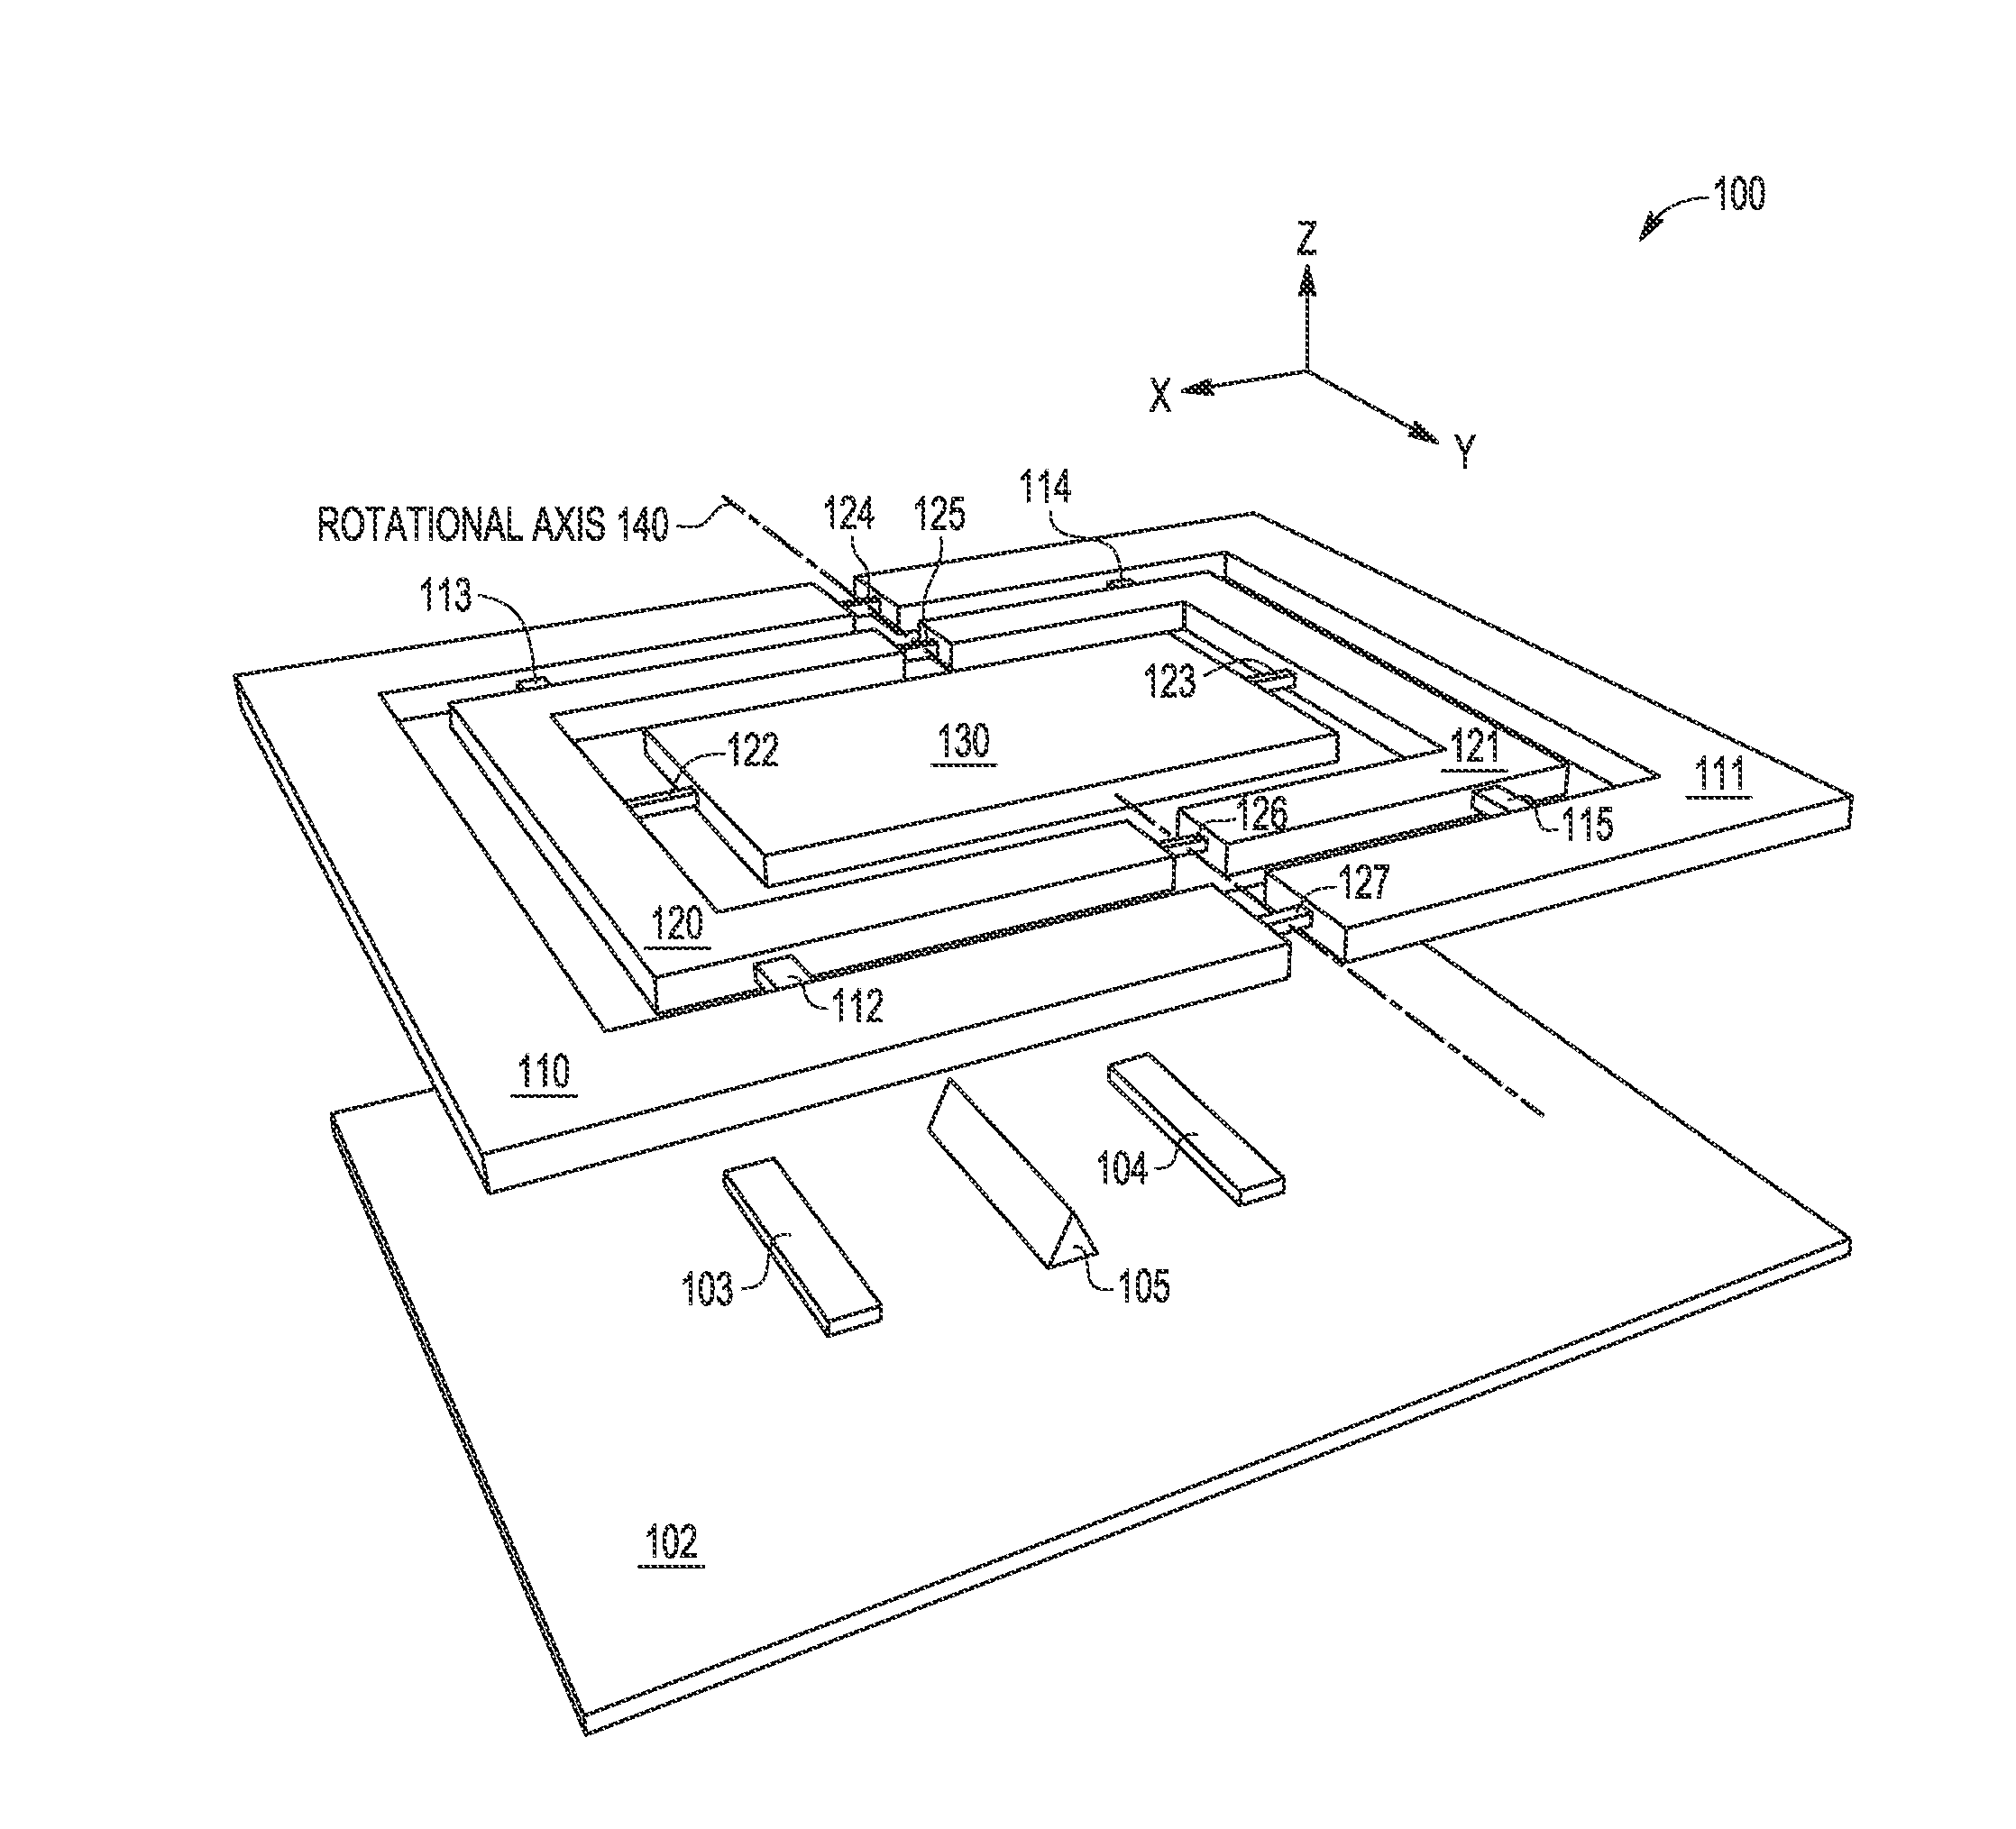 Fully Decoupled Lateral Axis Gyroscope with Thickness-Insensitive Z-Axis Spring and Symmetric Teeter Totter Sensing Element